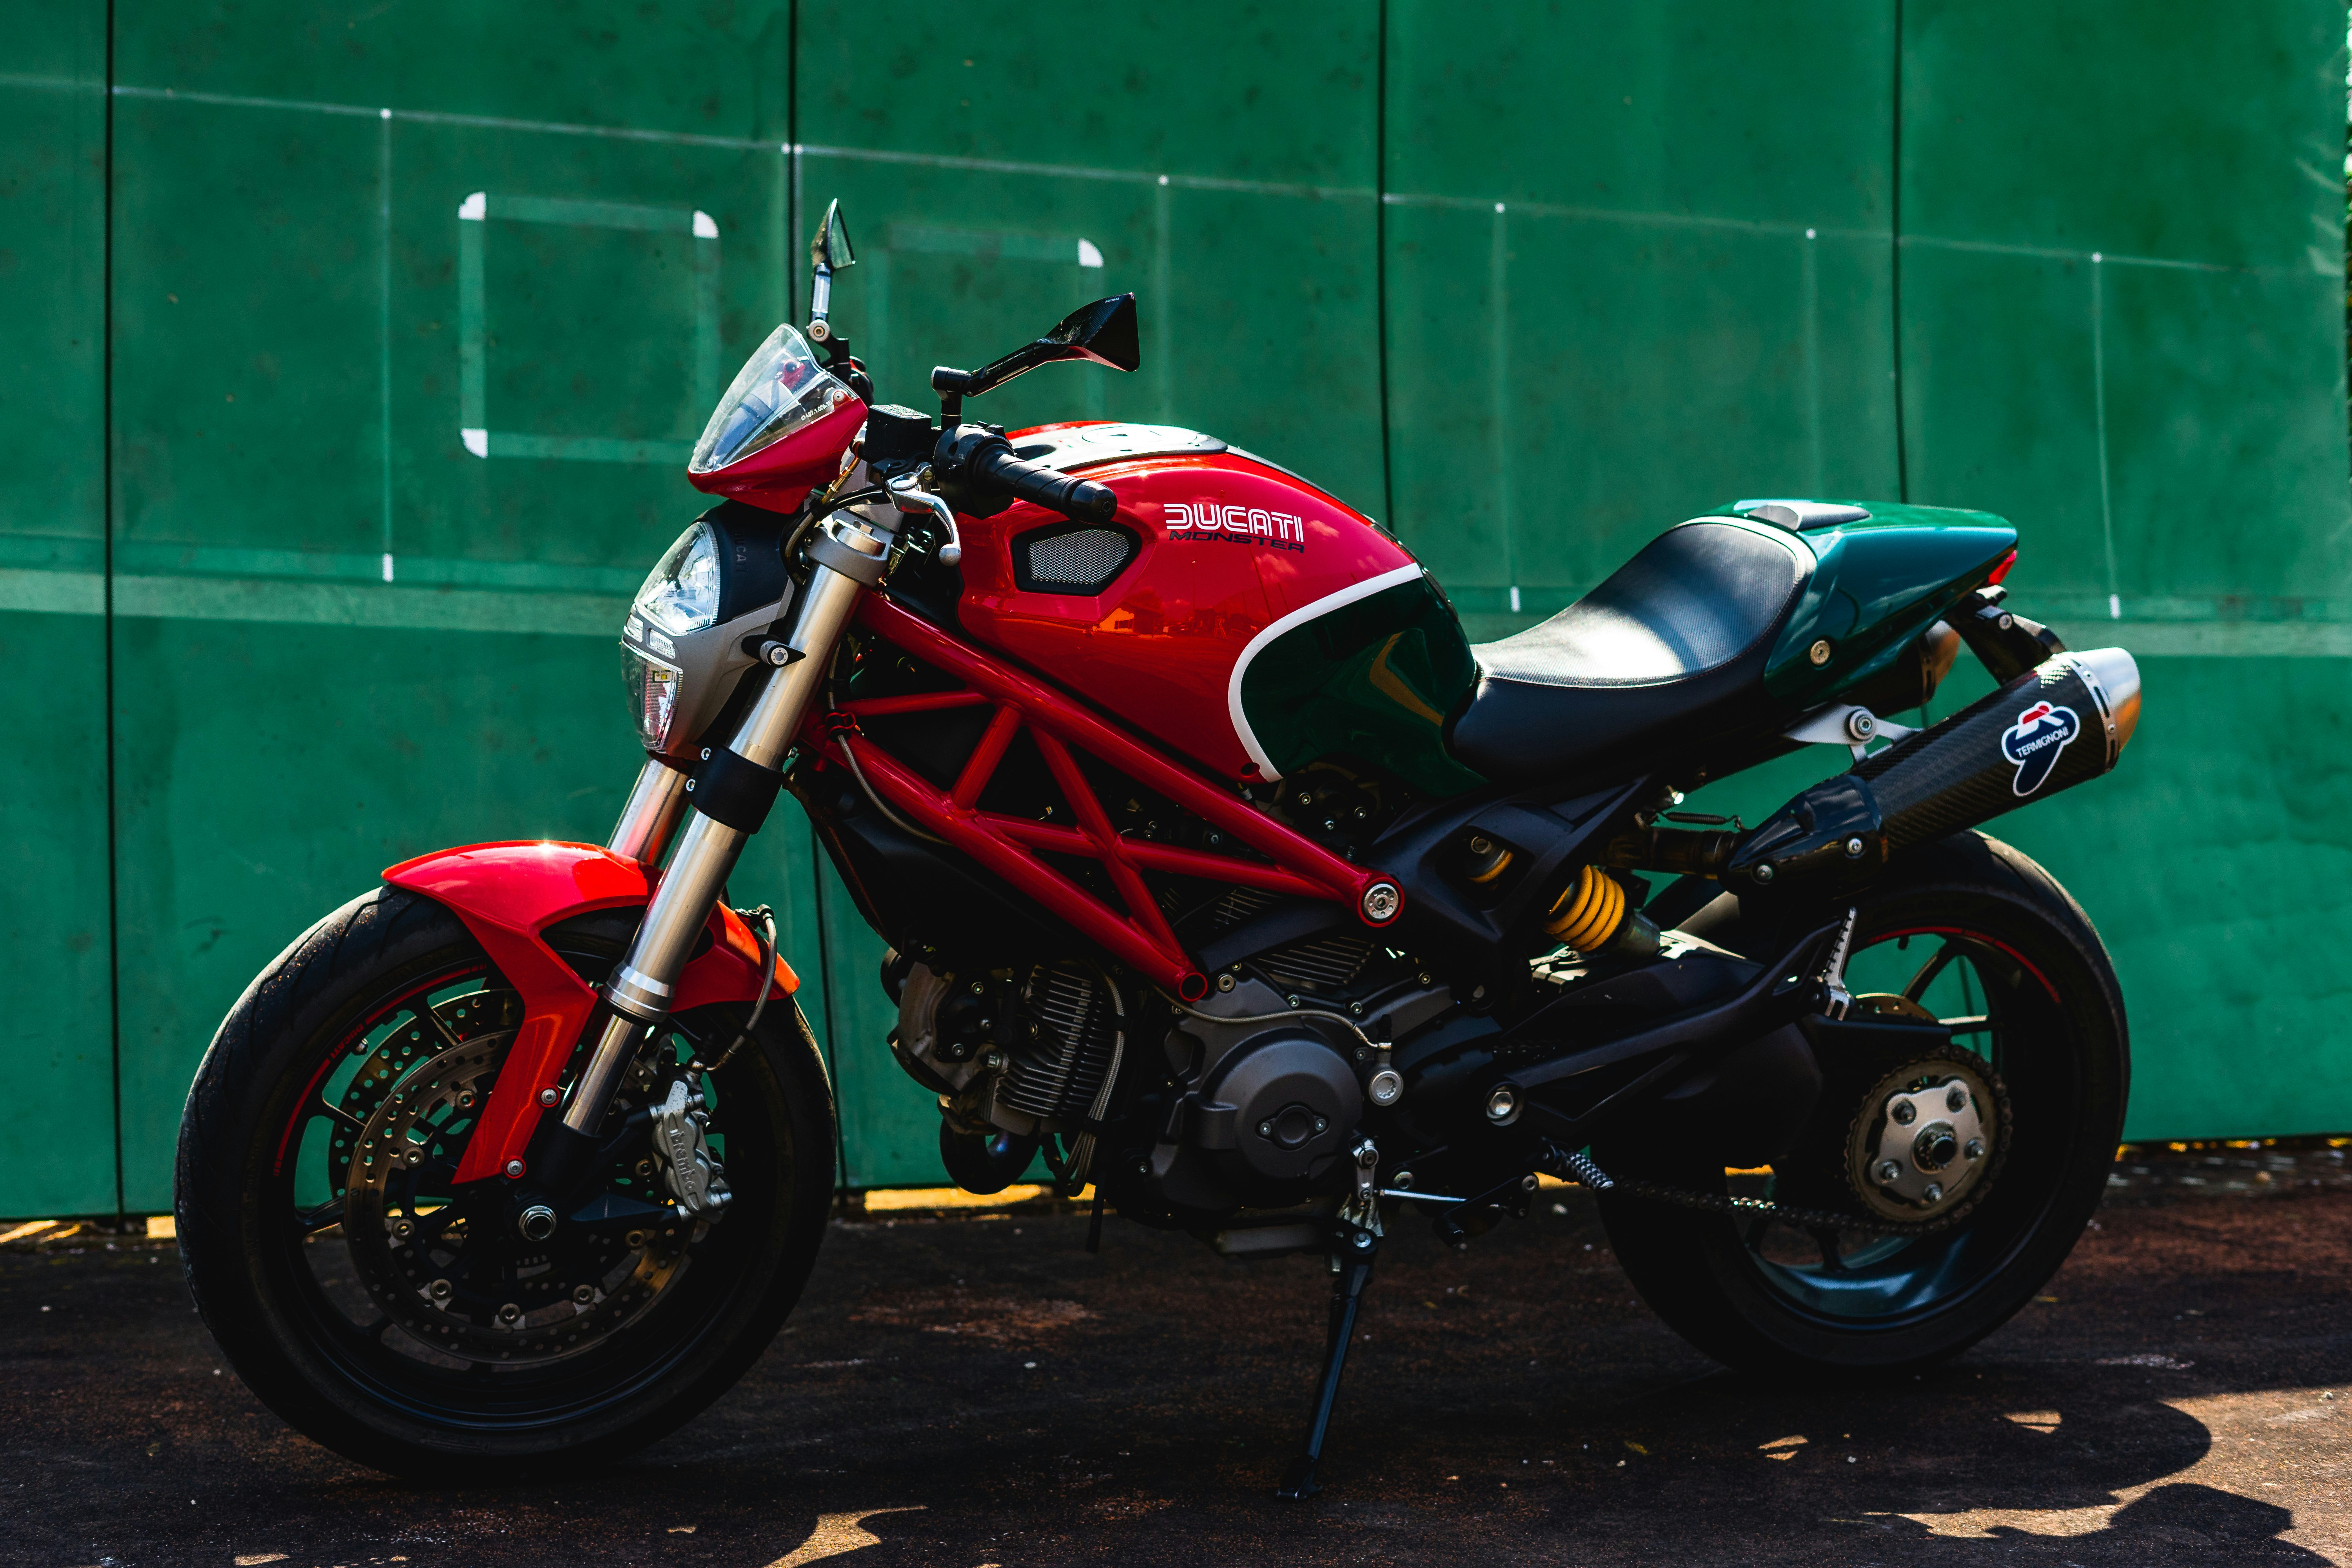 red and black sports bike parked beside green wall